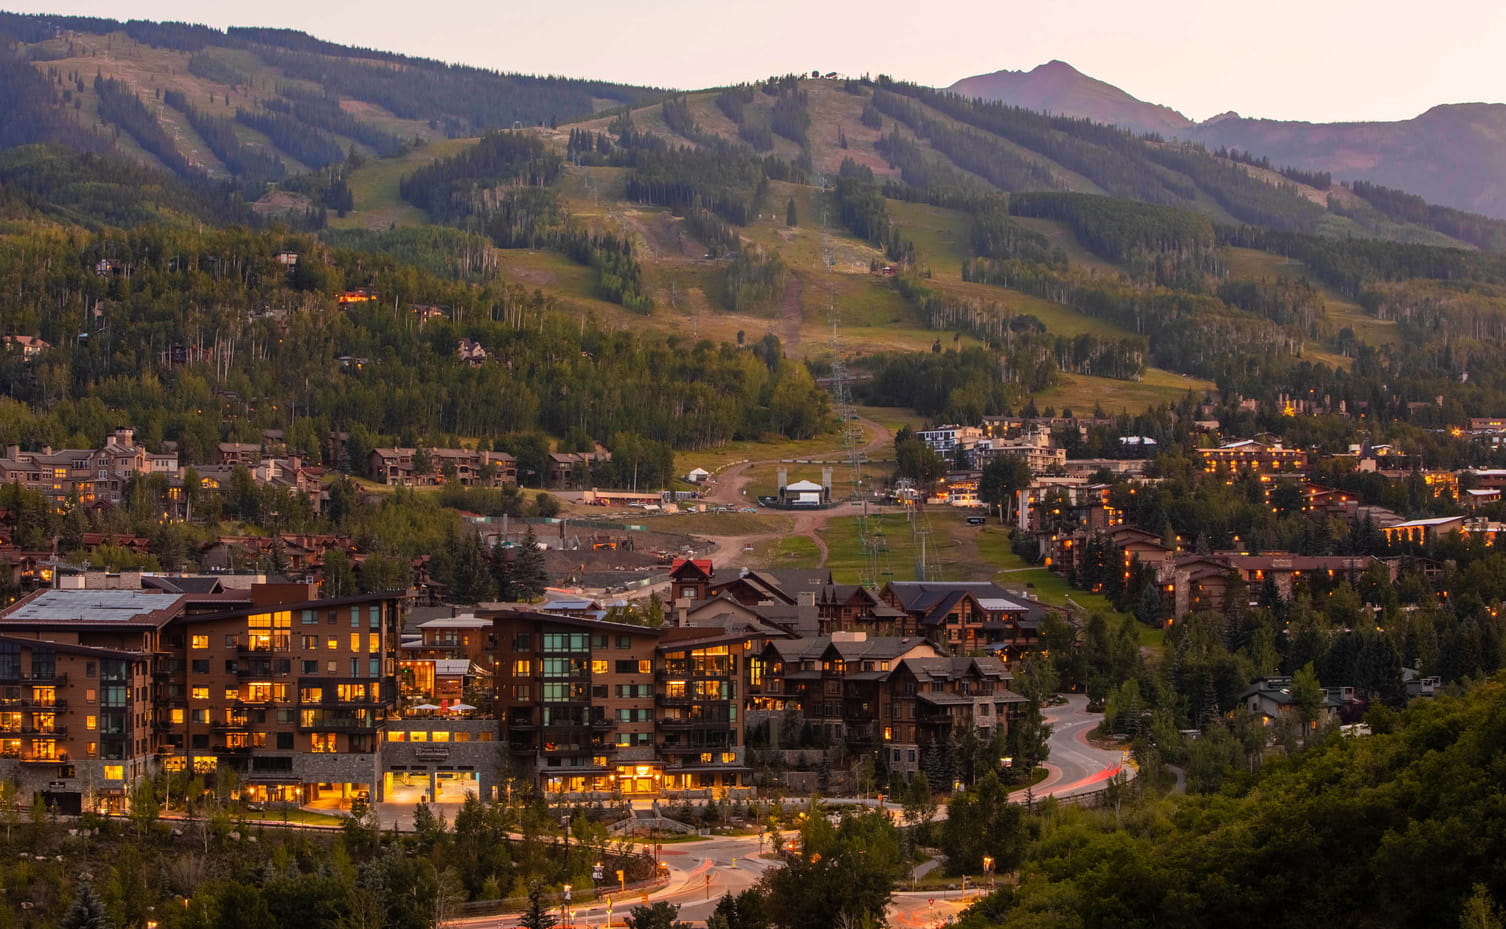 Snowmass condos, lodges, and hotels for your summer trip